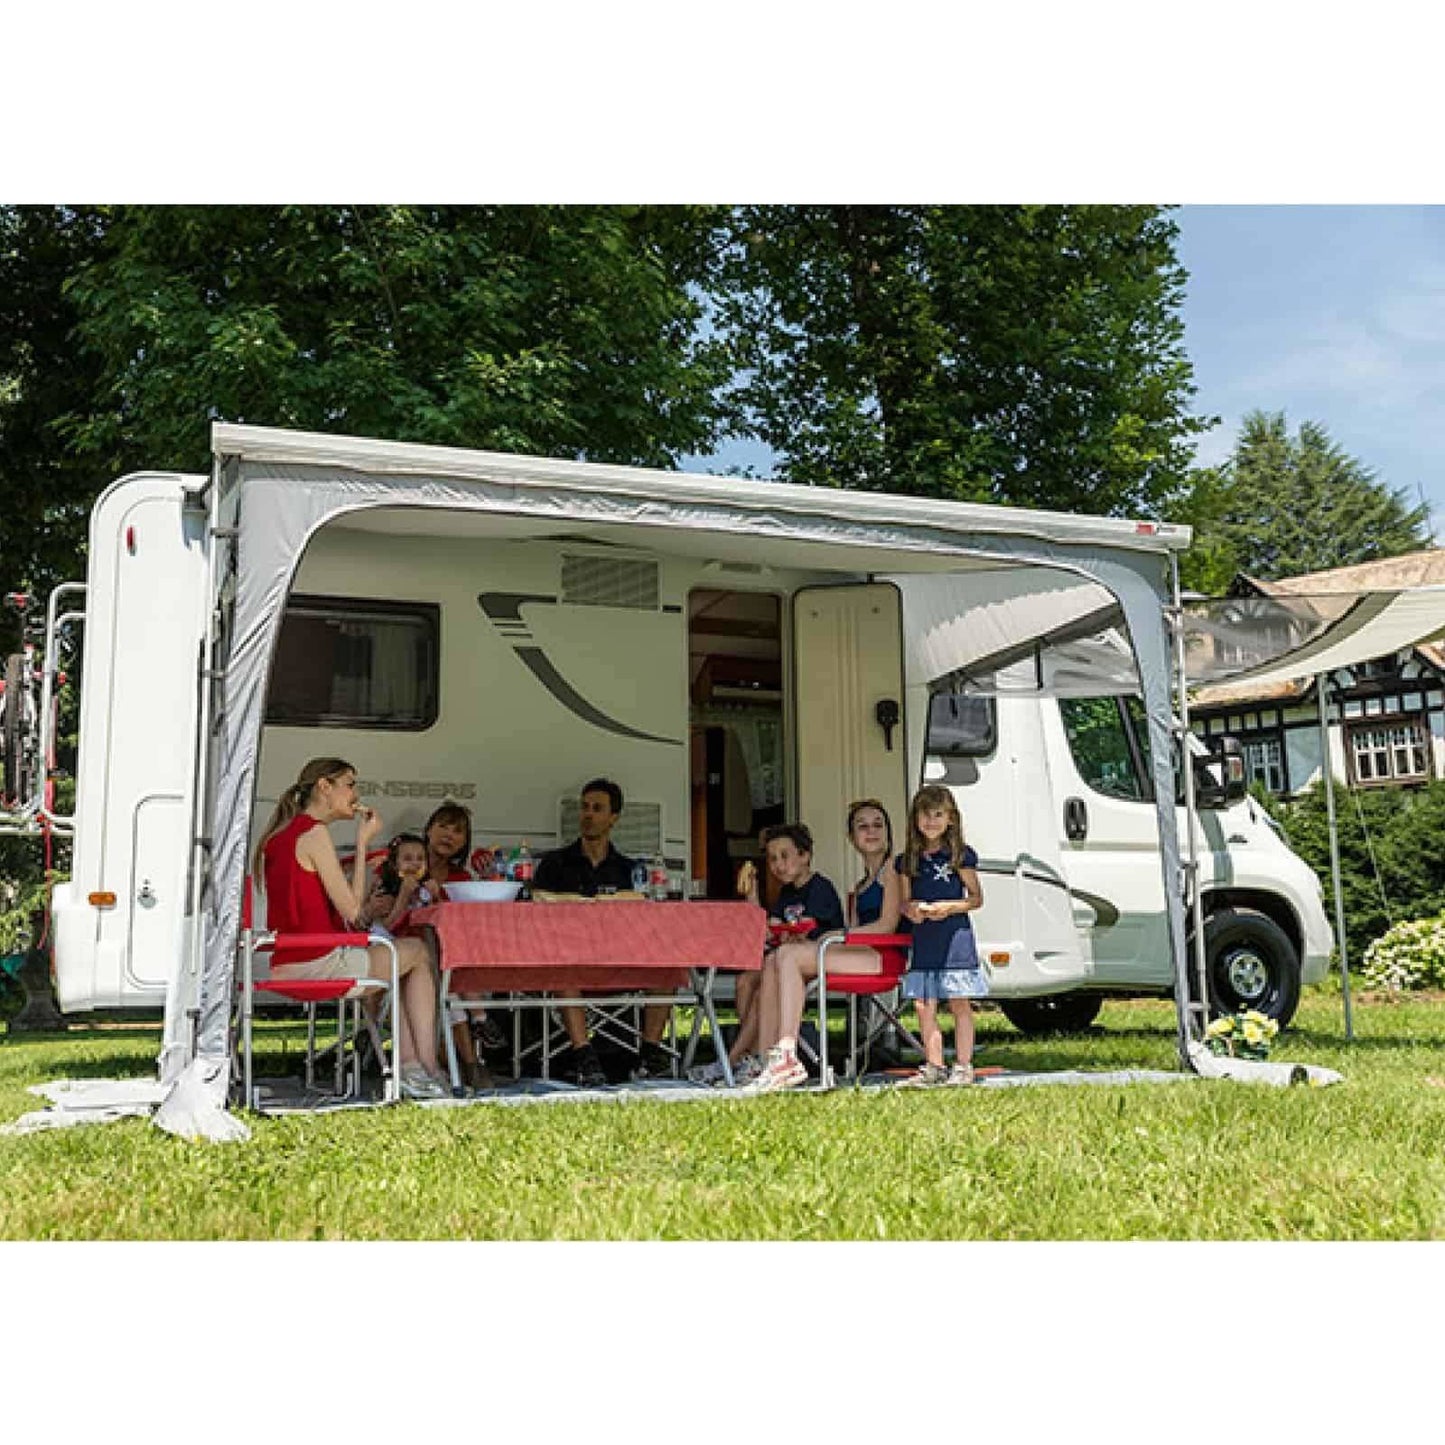 Fiamma Ultra Light Privacy Room made by Fiamma. A Tent sold by Quality Caravan Awnings